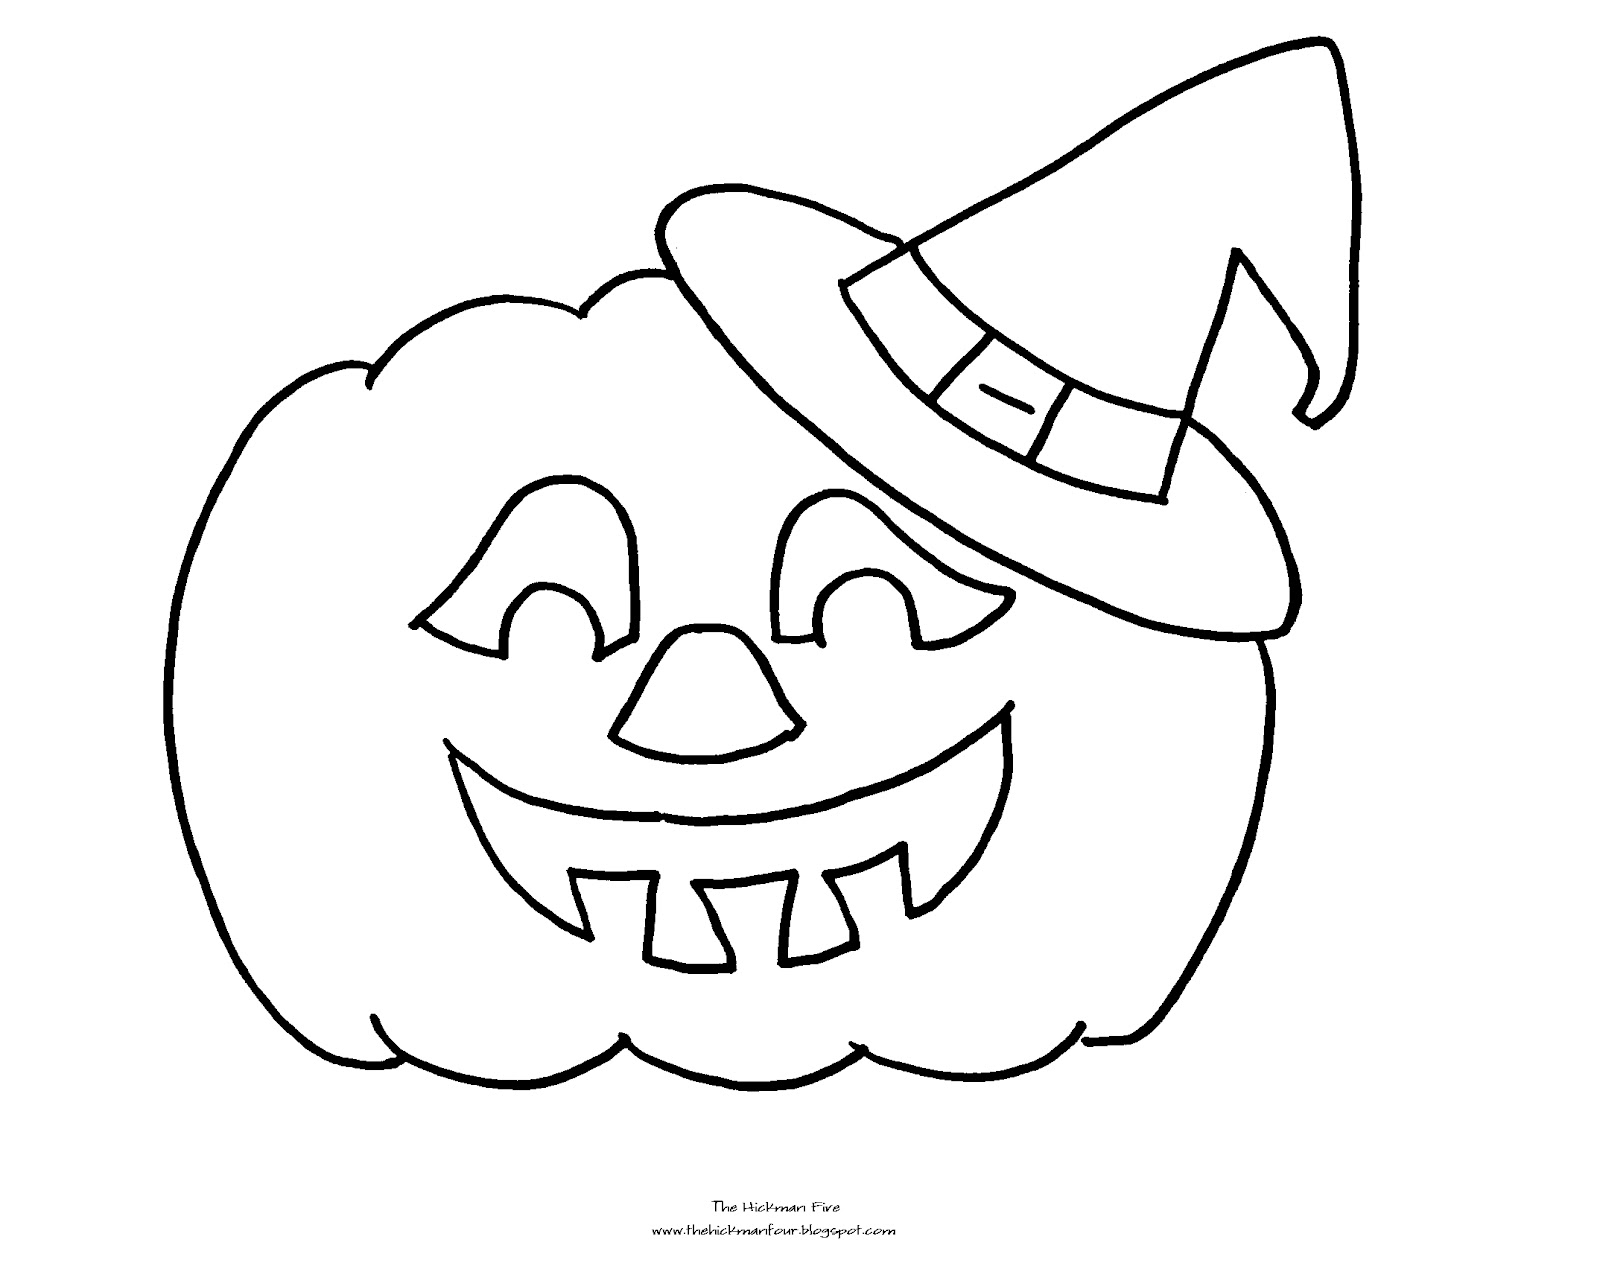 Lantern Coloring Pages at GetColorings.com | Free printable colorings ...